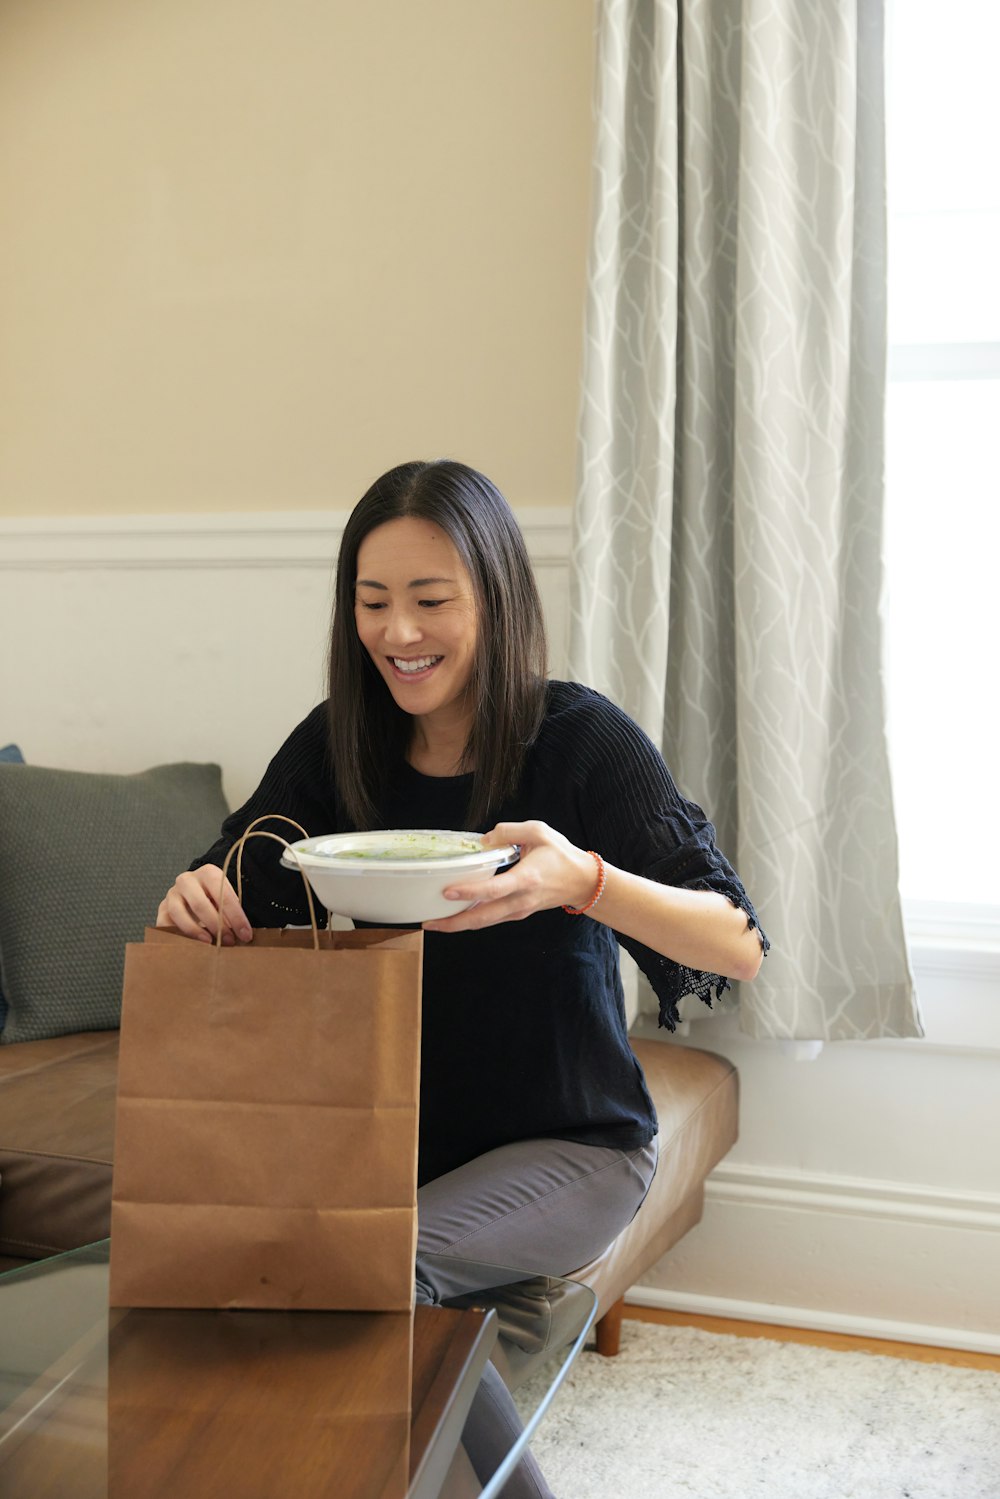 woman removing takeout food from brown paper bag